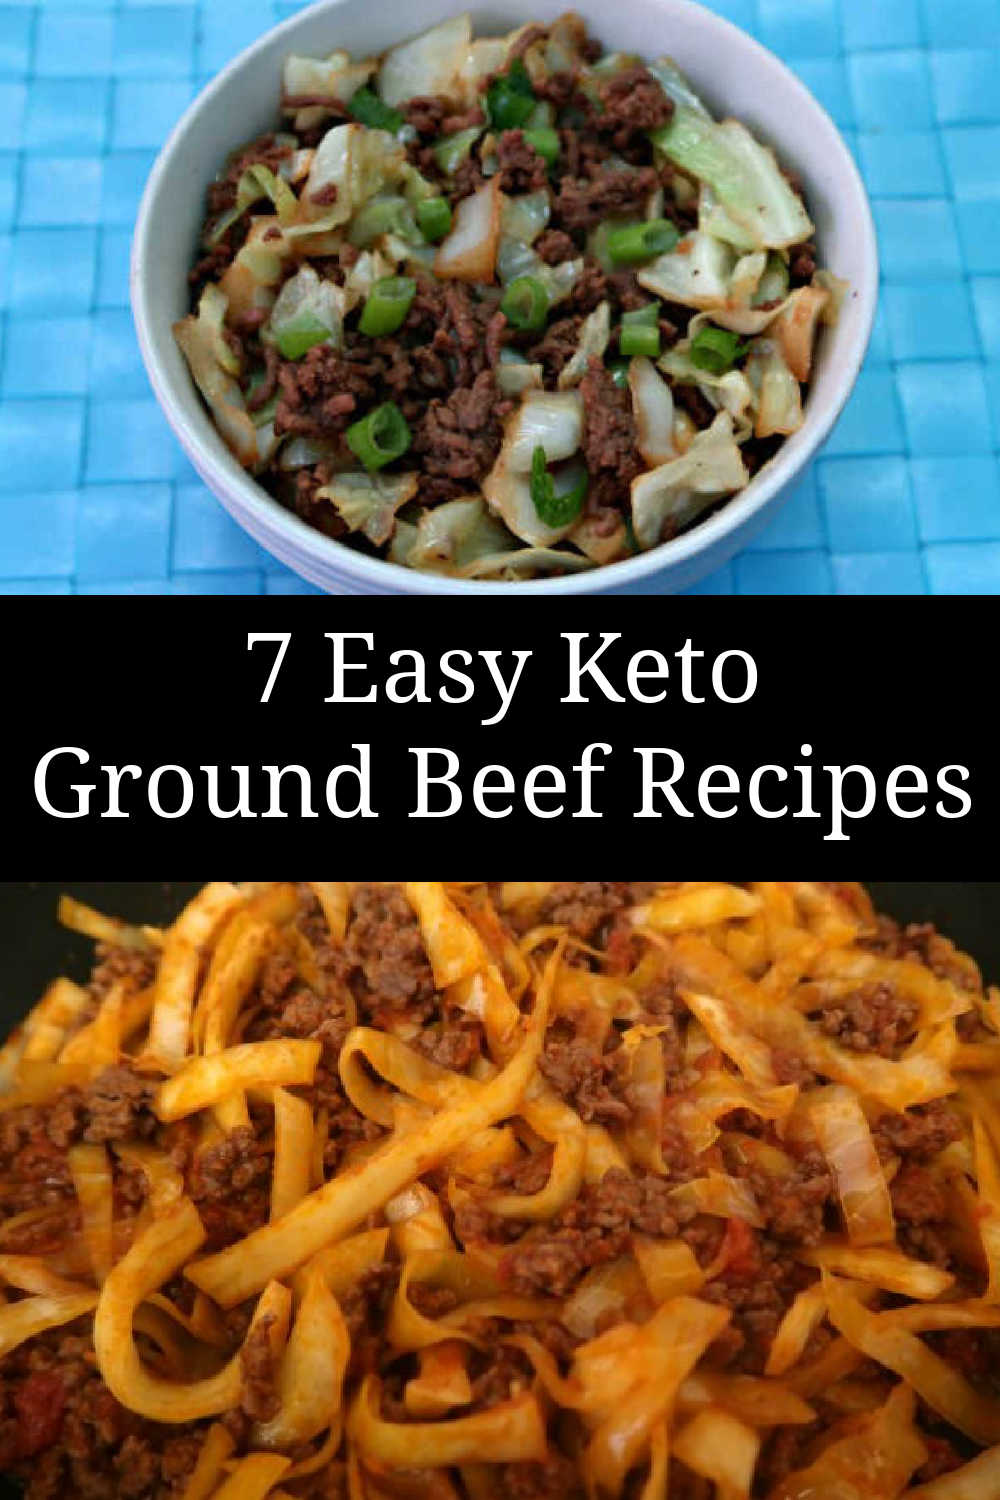 7 Keto Ground Beef Recipes - The Best Easy Low Carb Dinner Ideas - with the videos showing you how to make the quick simple budget friendly meals.